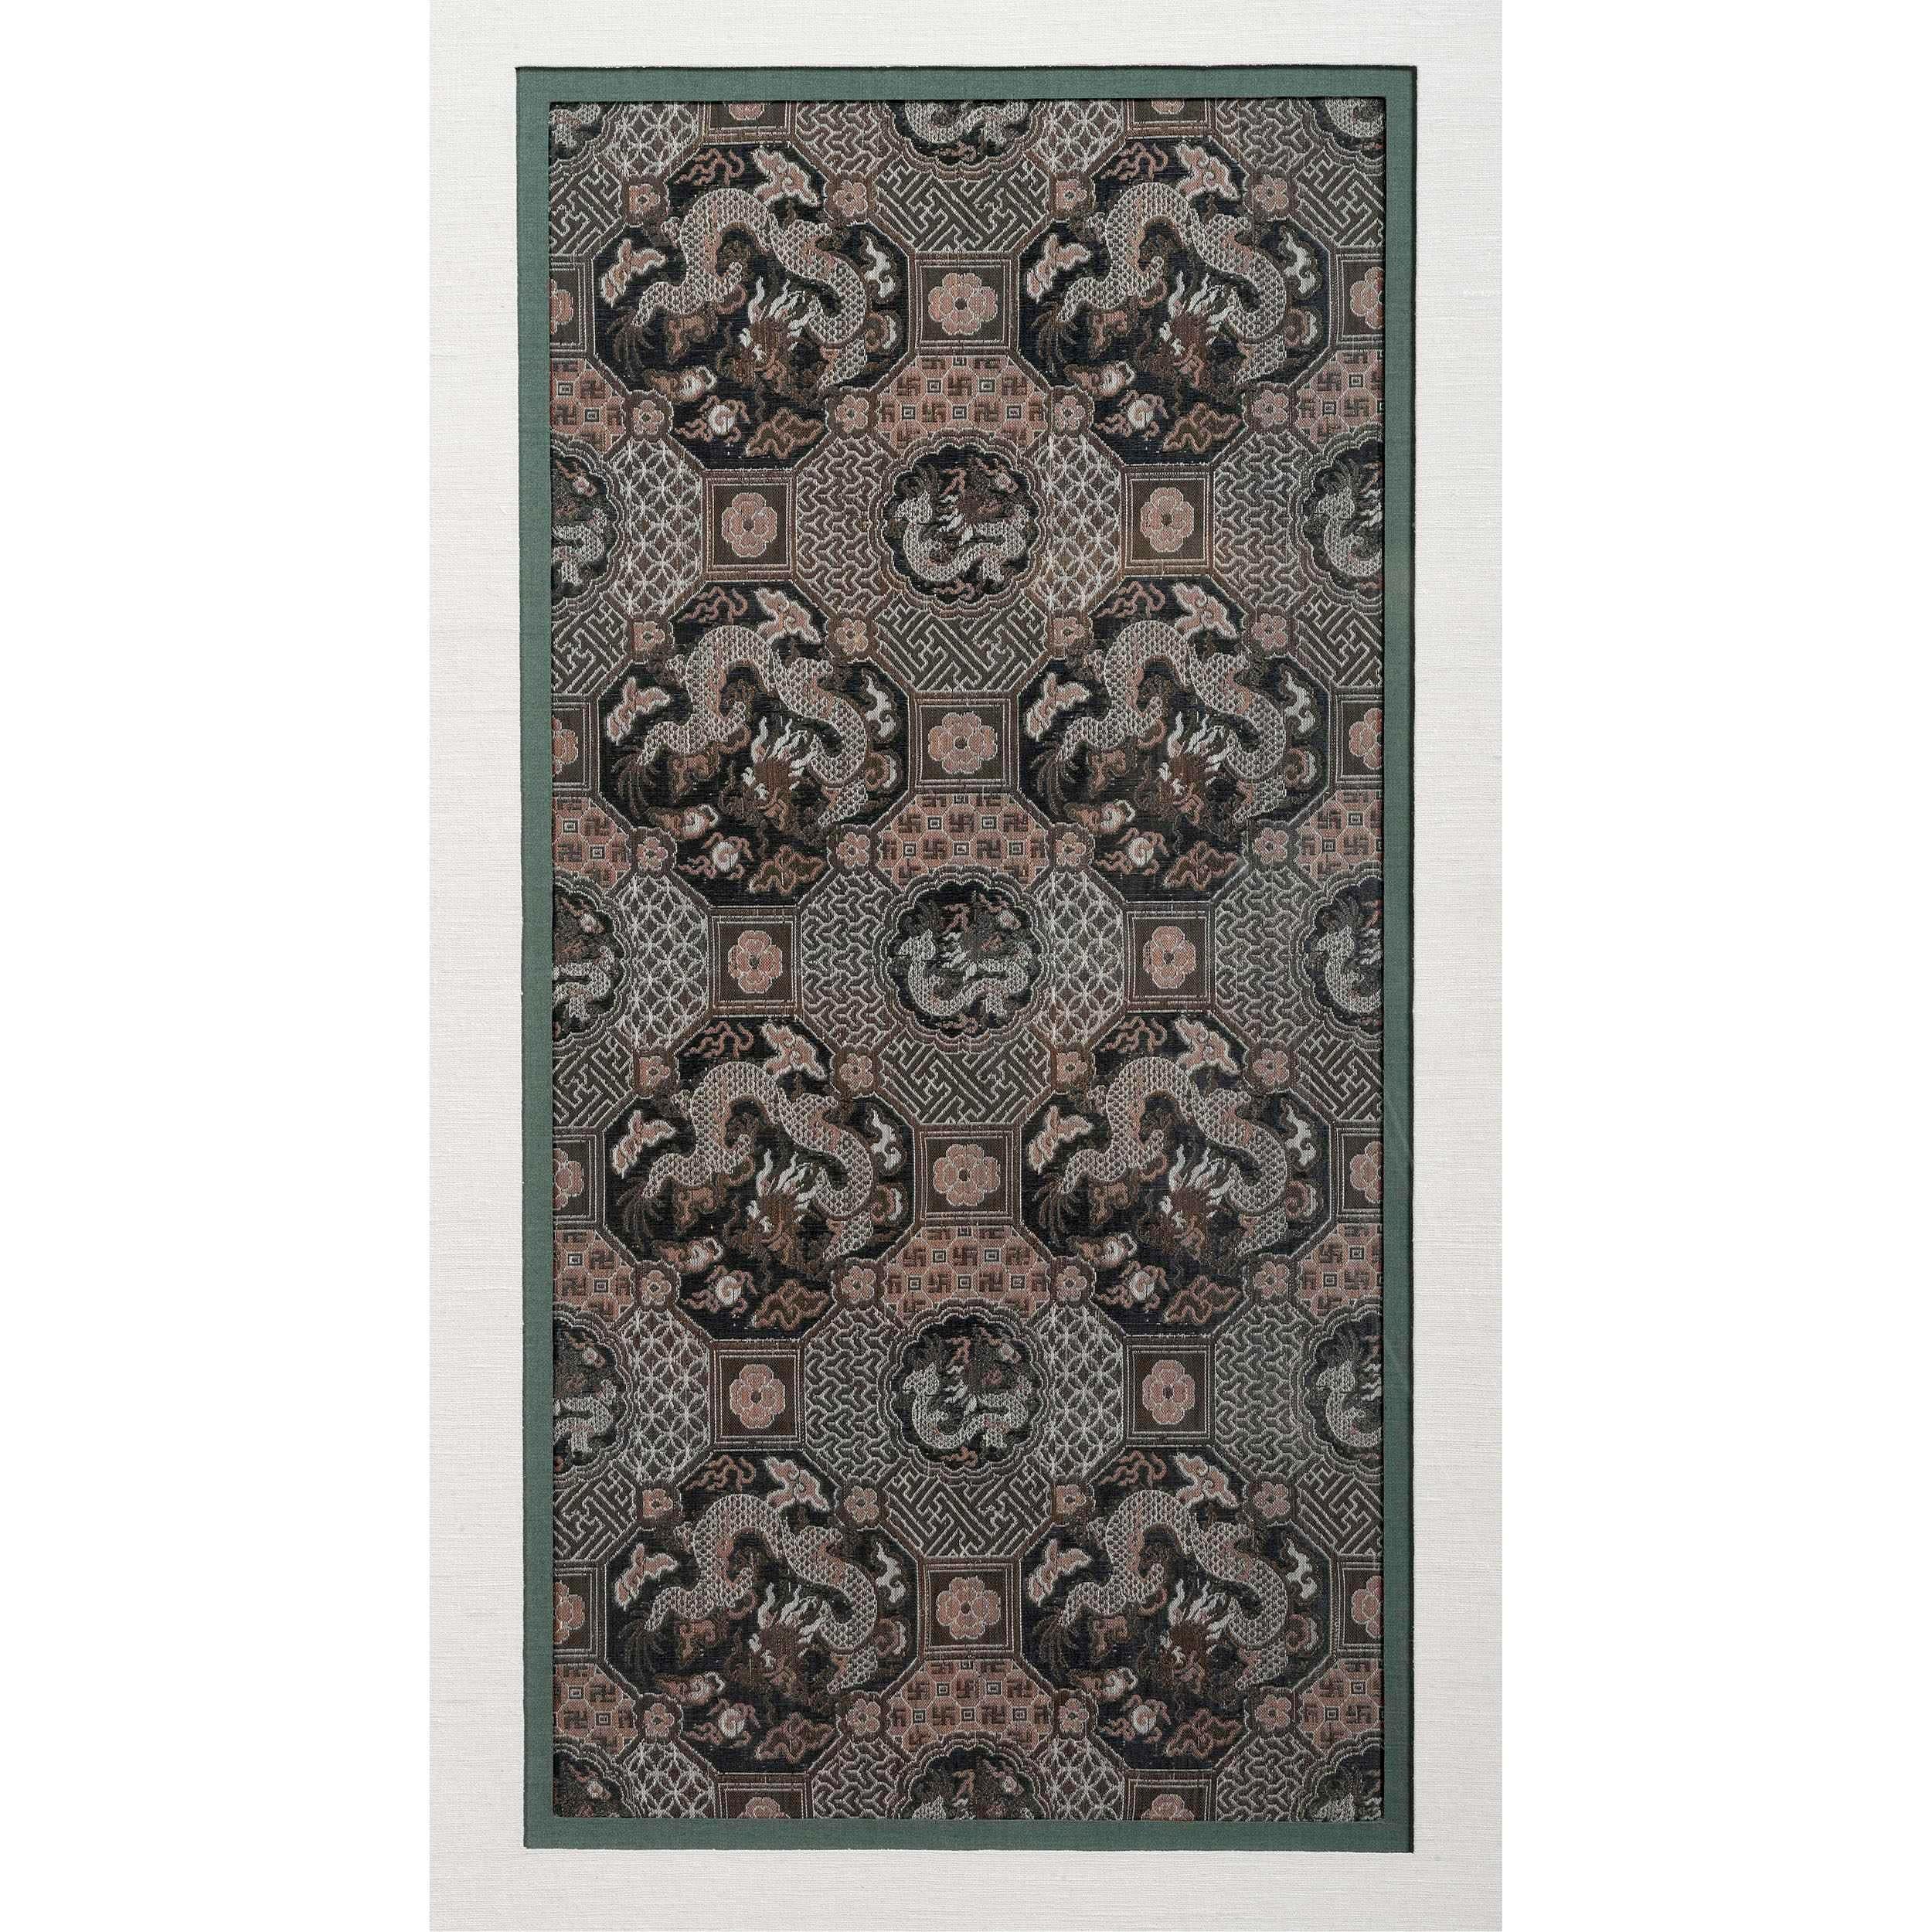 Antique Chinese brocade dragon panel from Imperial Qing Dynasty circa 19th century, beautifully presented with a linen mat and in a silvered wood shadow frame, is presented as an impressive piece of textile art. The finely woven brocade was a fabric